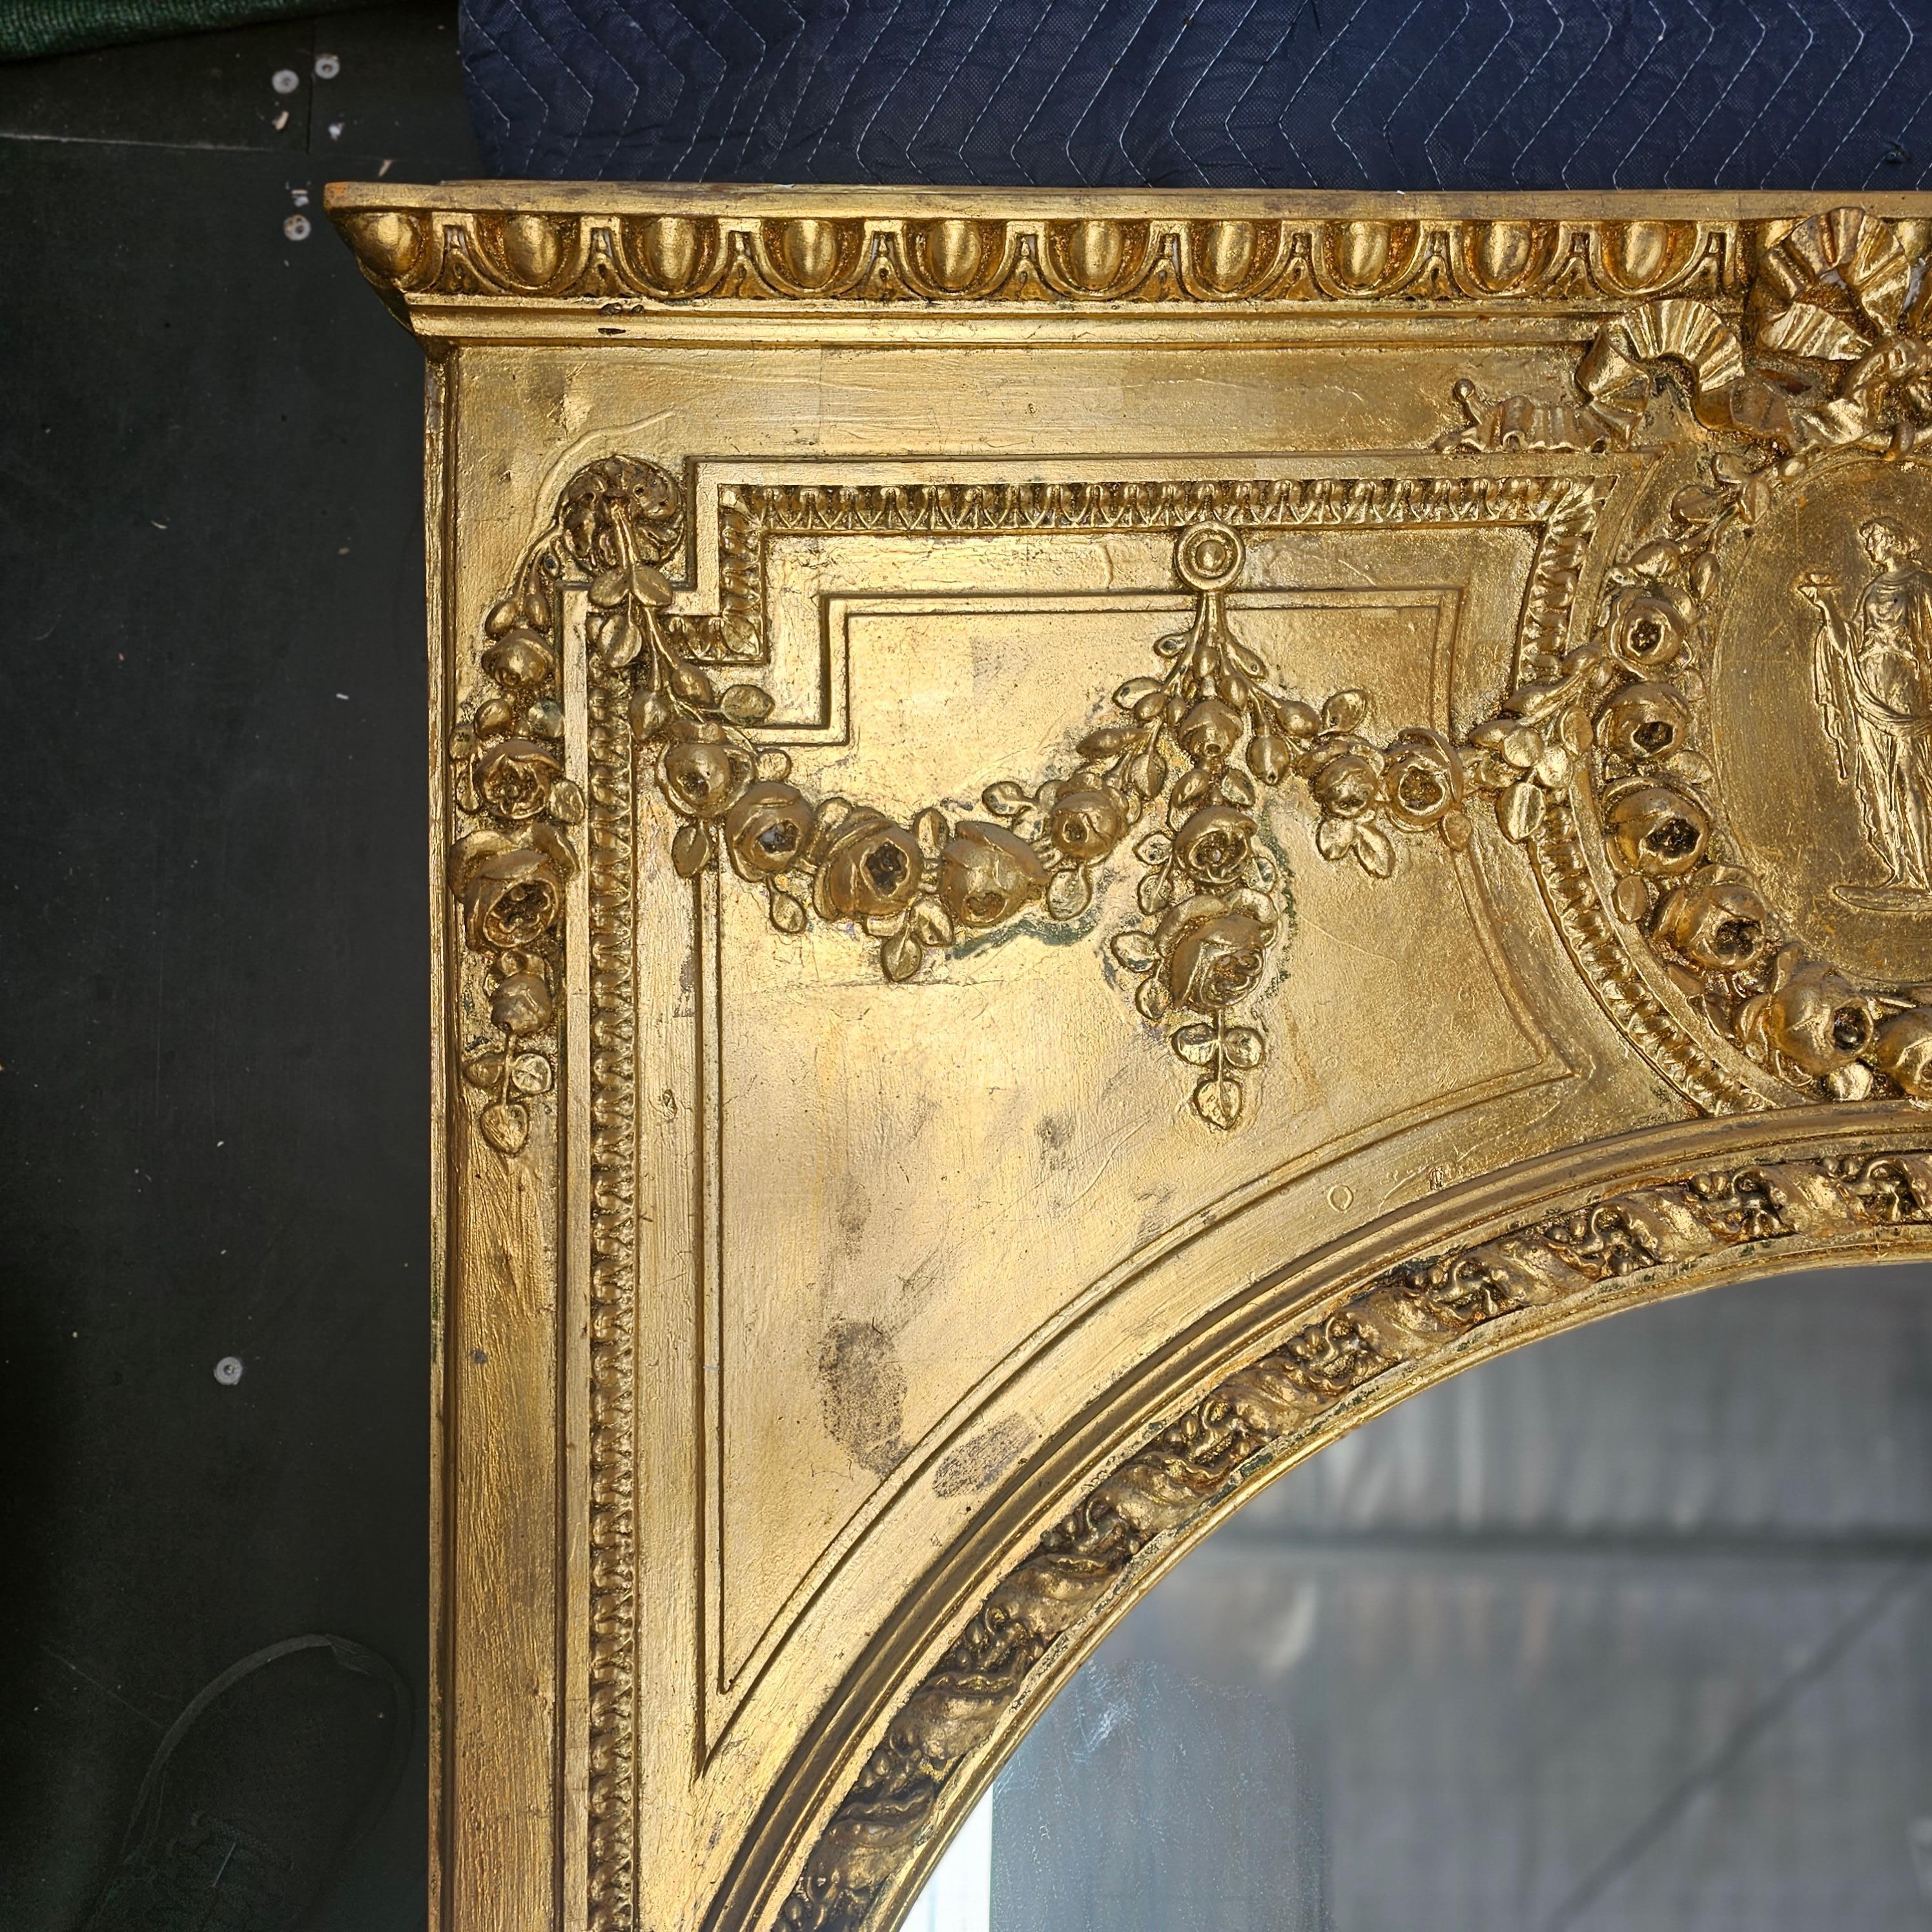 Impressive 20th Century Bespoke Large Gold Leaf Louis XVI Style French Trumeau Mirror

c. 1960's, Australia

Created by Australian renowned furniture maker William White, is this absolute one of a kind, handcrafted Louis XVI Style French Trumeau